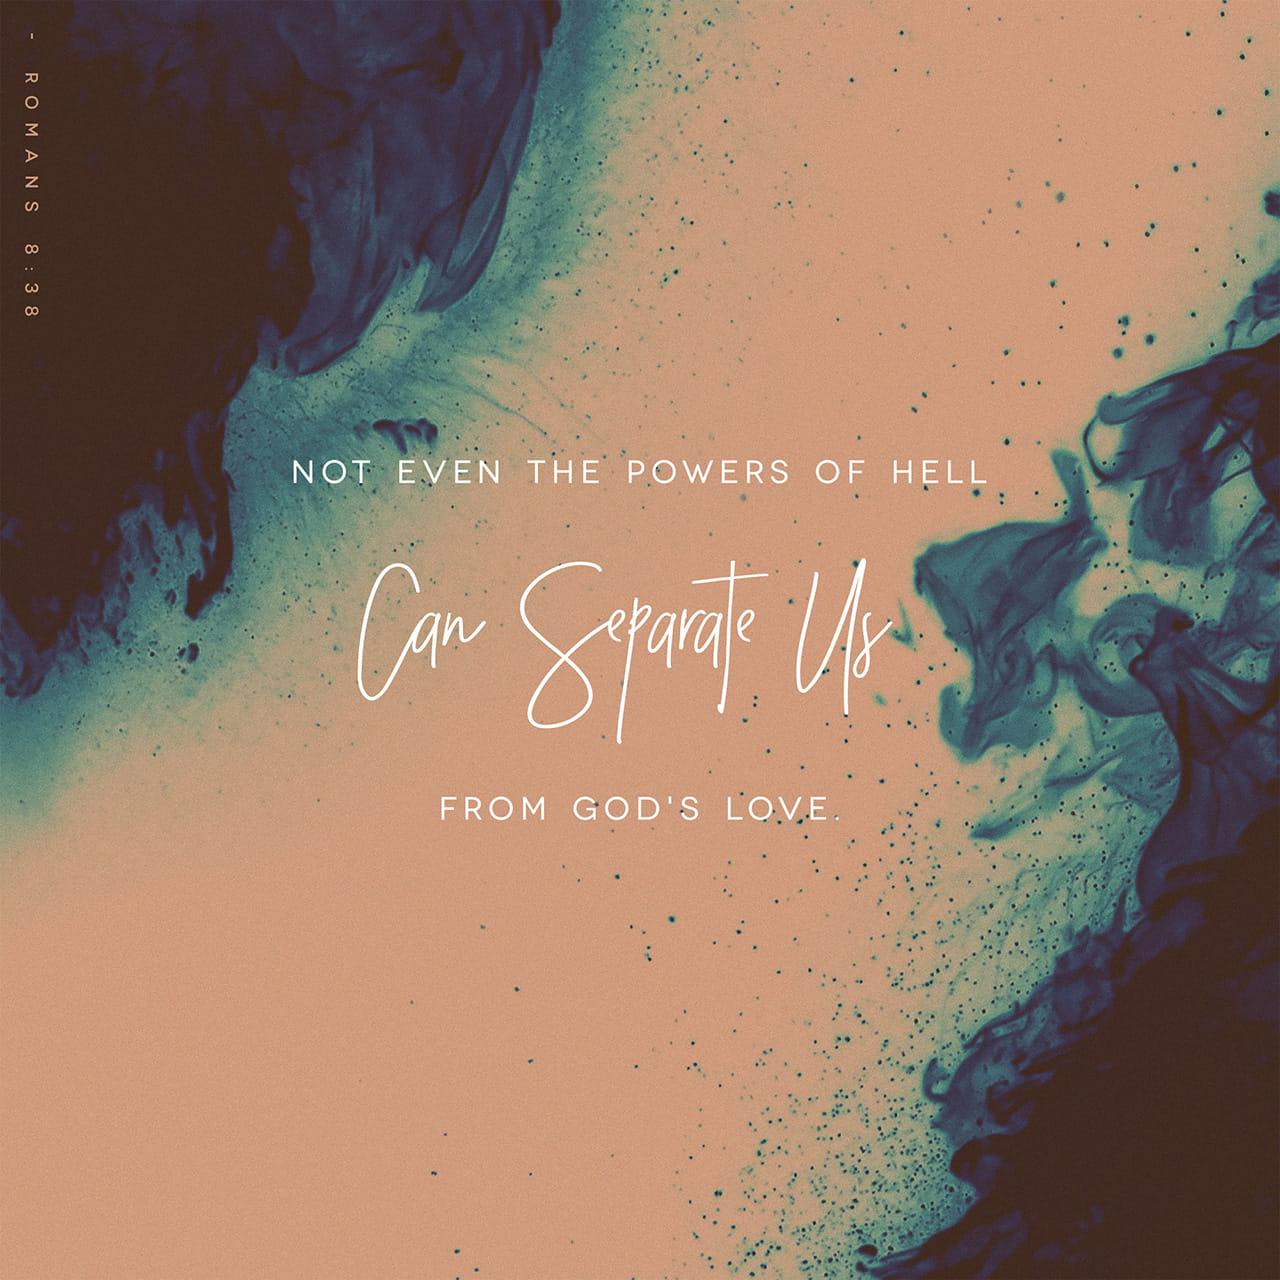 Bible Verse of the Day - day 154 - image 10803 (Romans 8:38-39)